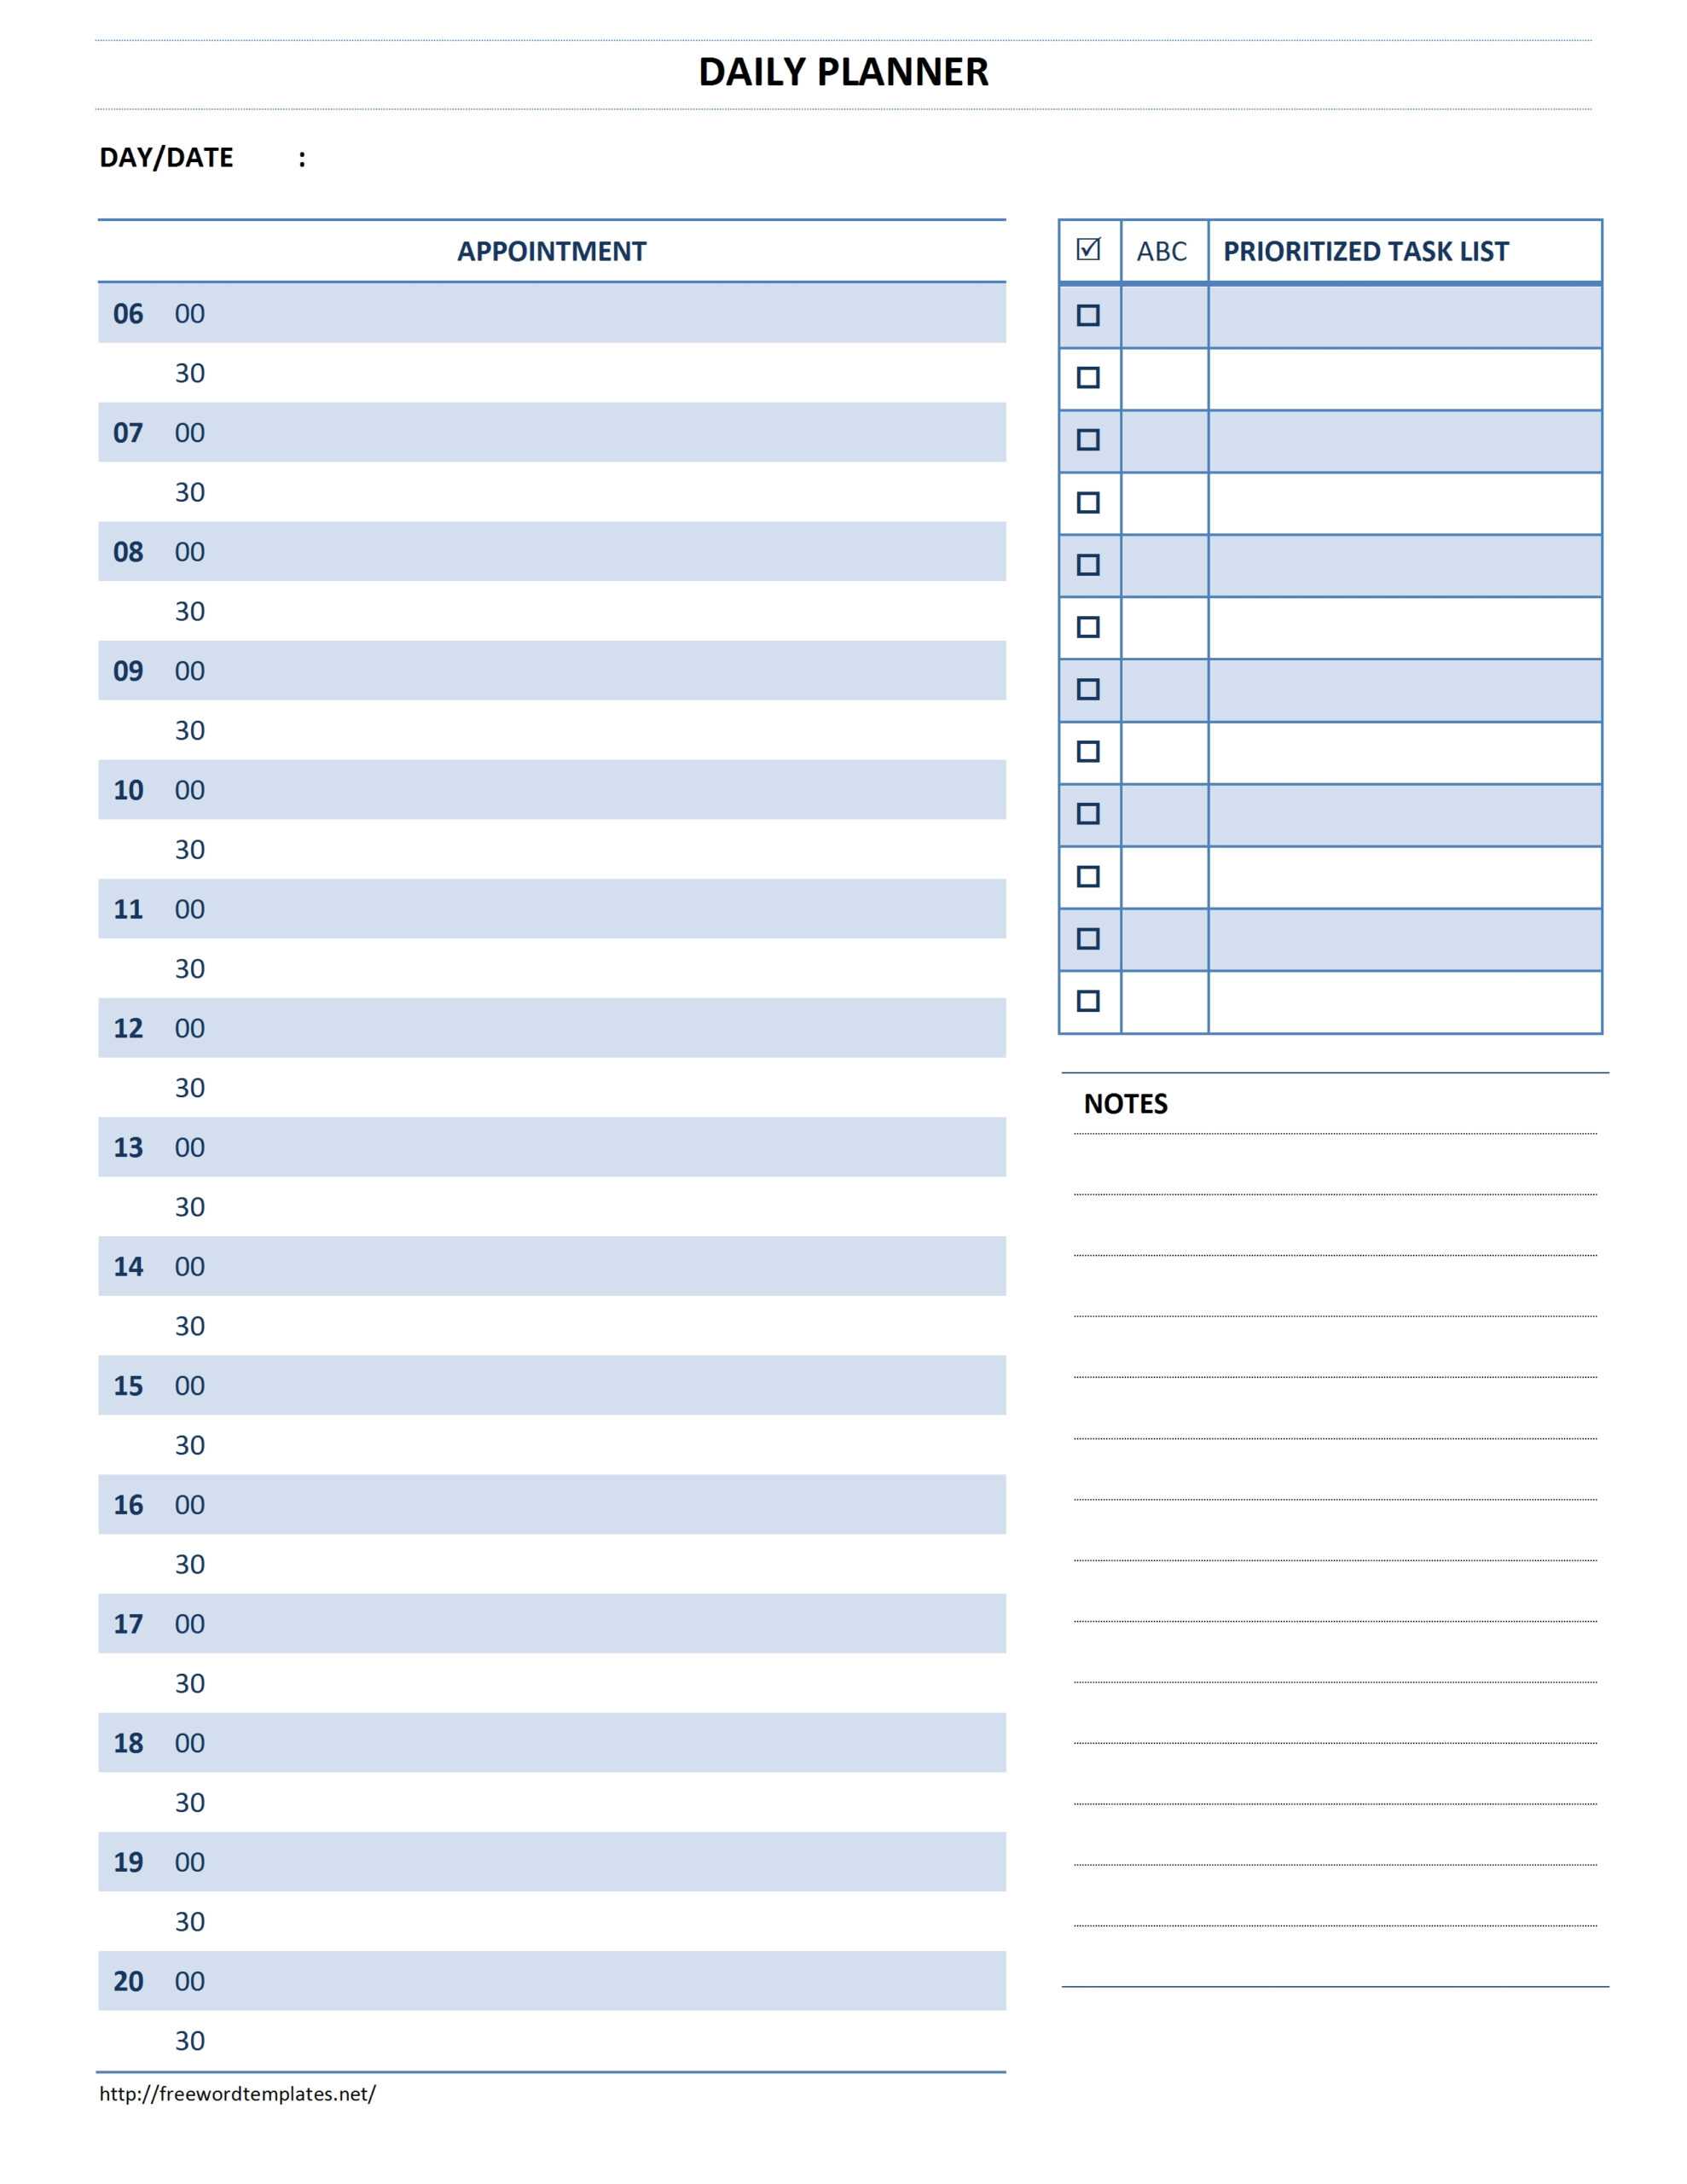 Daily Planner Template Regarding Appointment Sheet Template Word